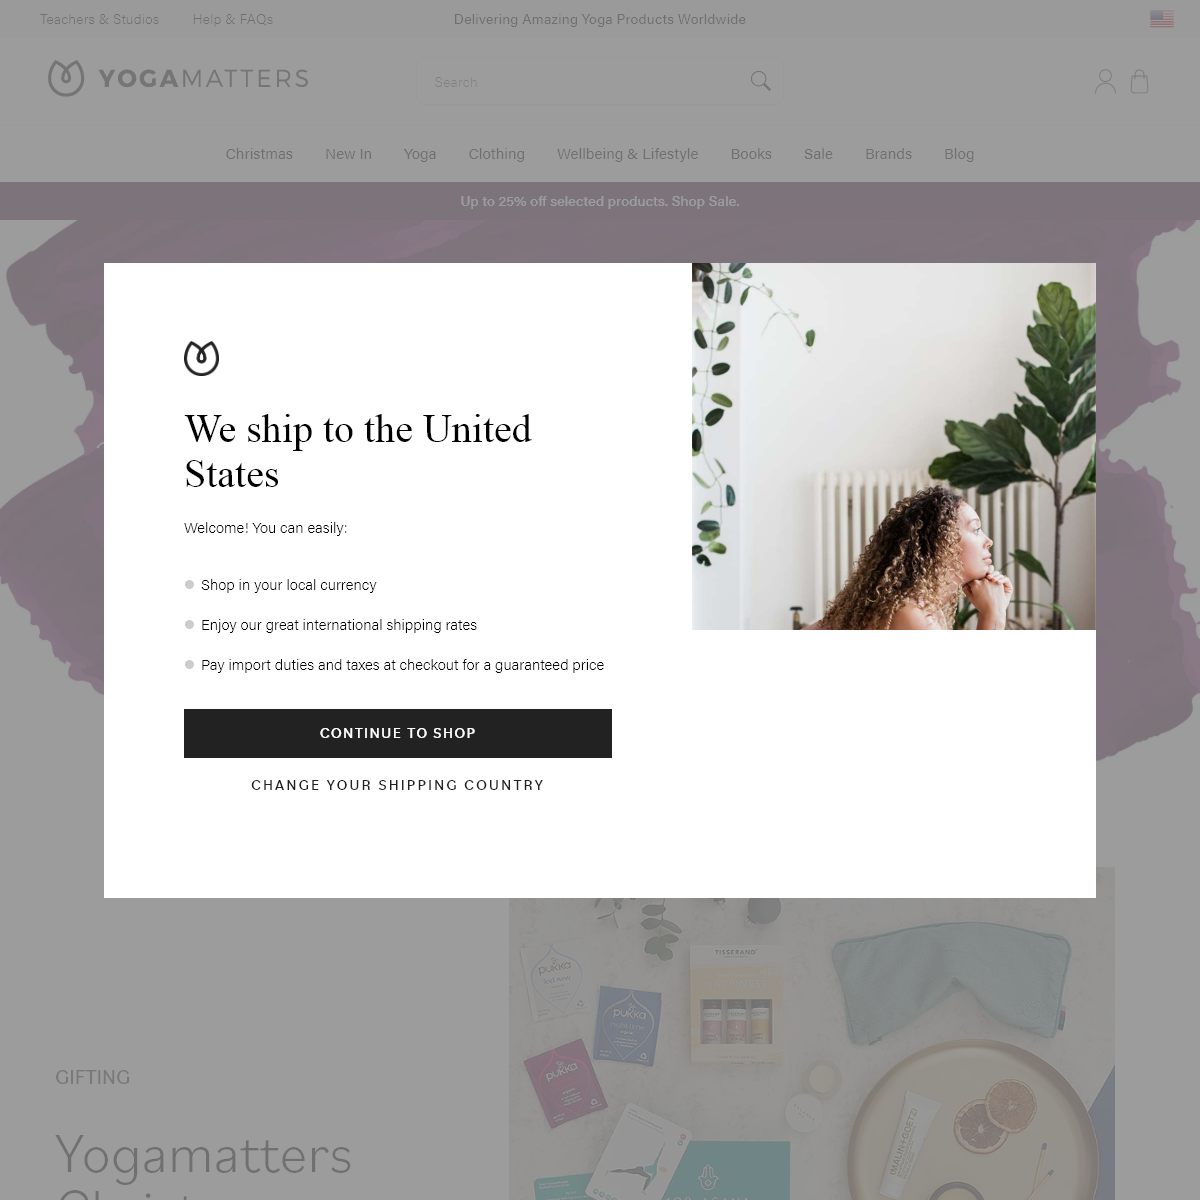 A complete backup of yogamatters.com